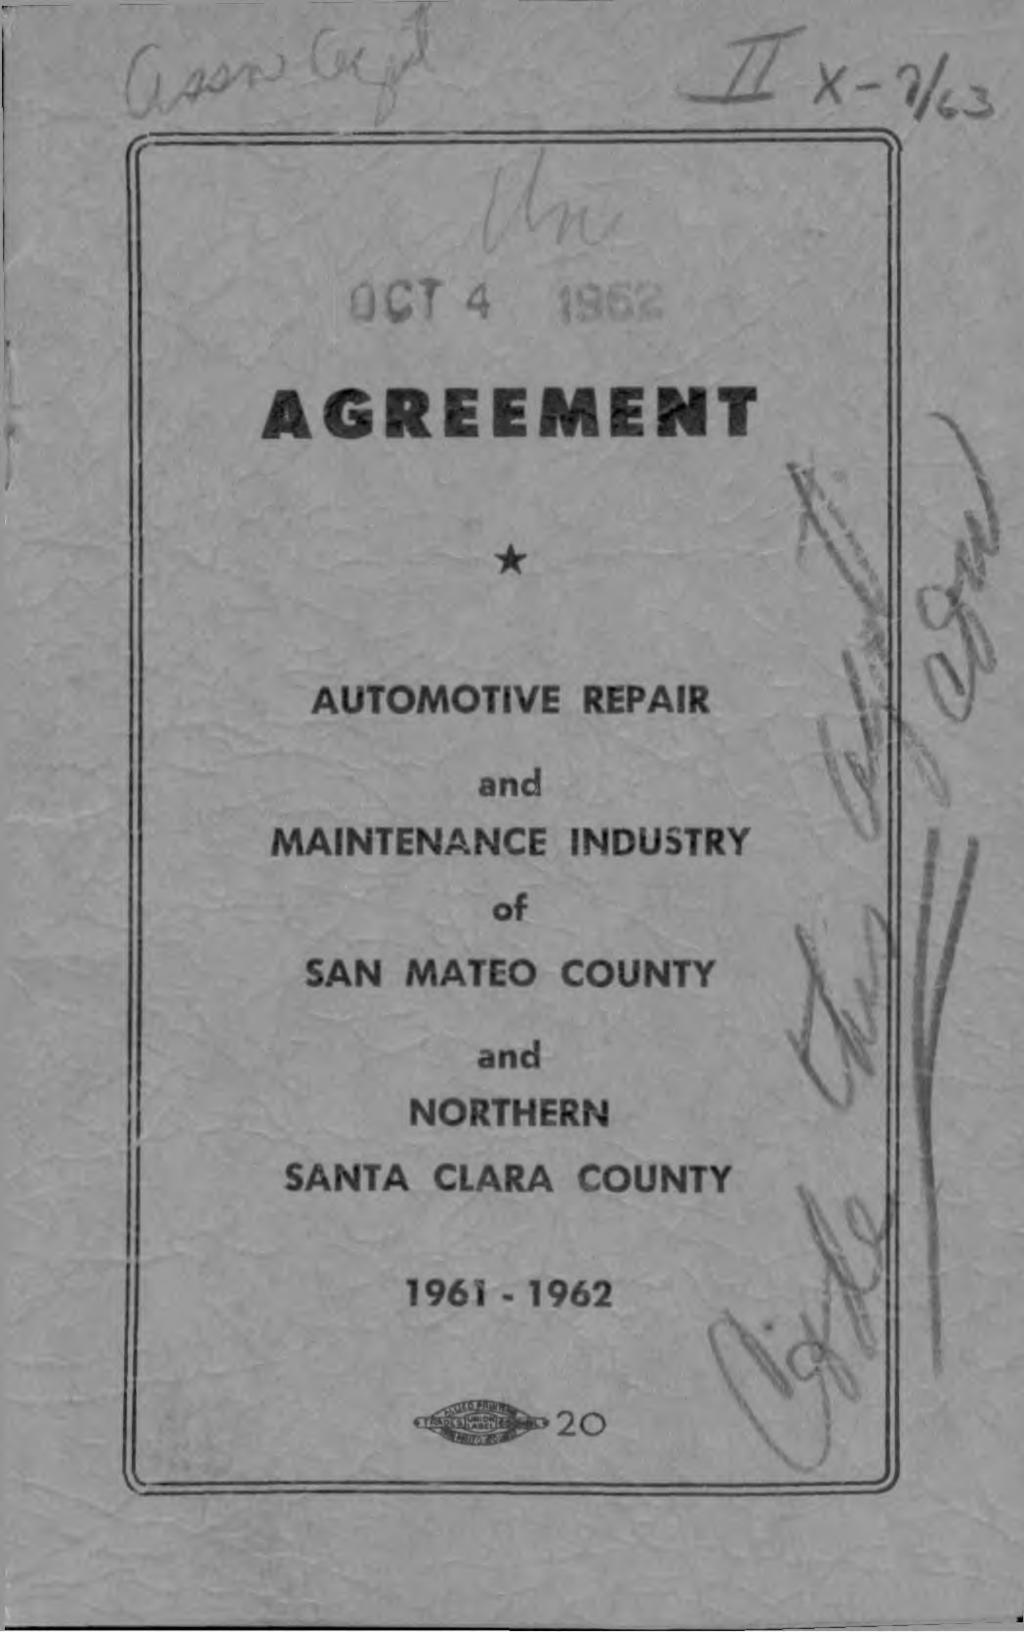 AGREEMENT AUTOMOTIVE REPAIR and MAINTENANCE